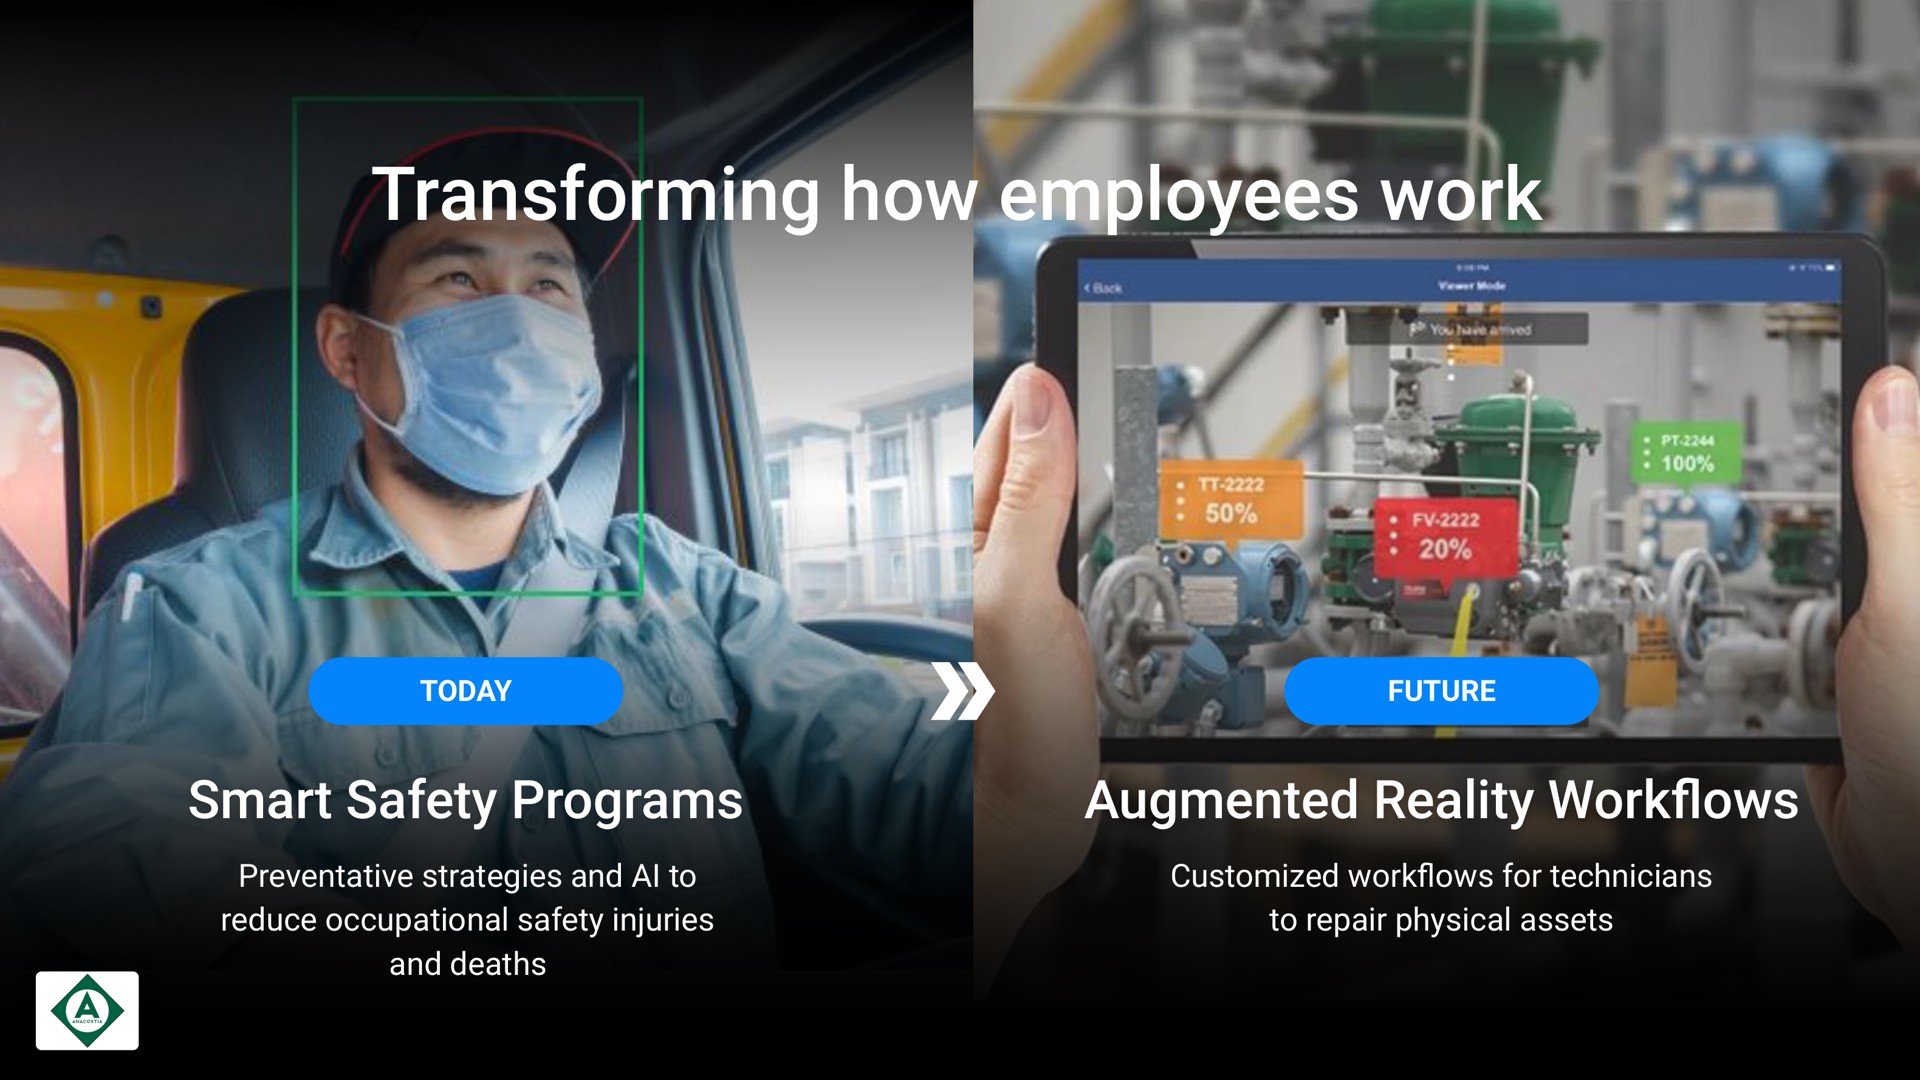 transforming how employees work today future smart safety programs augmented reality work preventative strategies and to reduce occupational safety injuries and deaths work for technicians to repair physical assets | Samsara